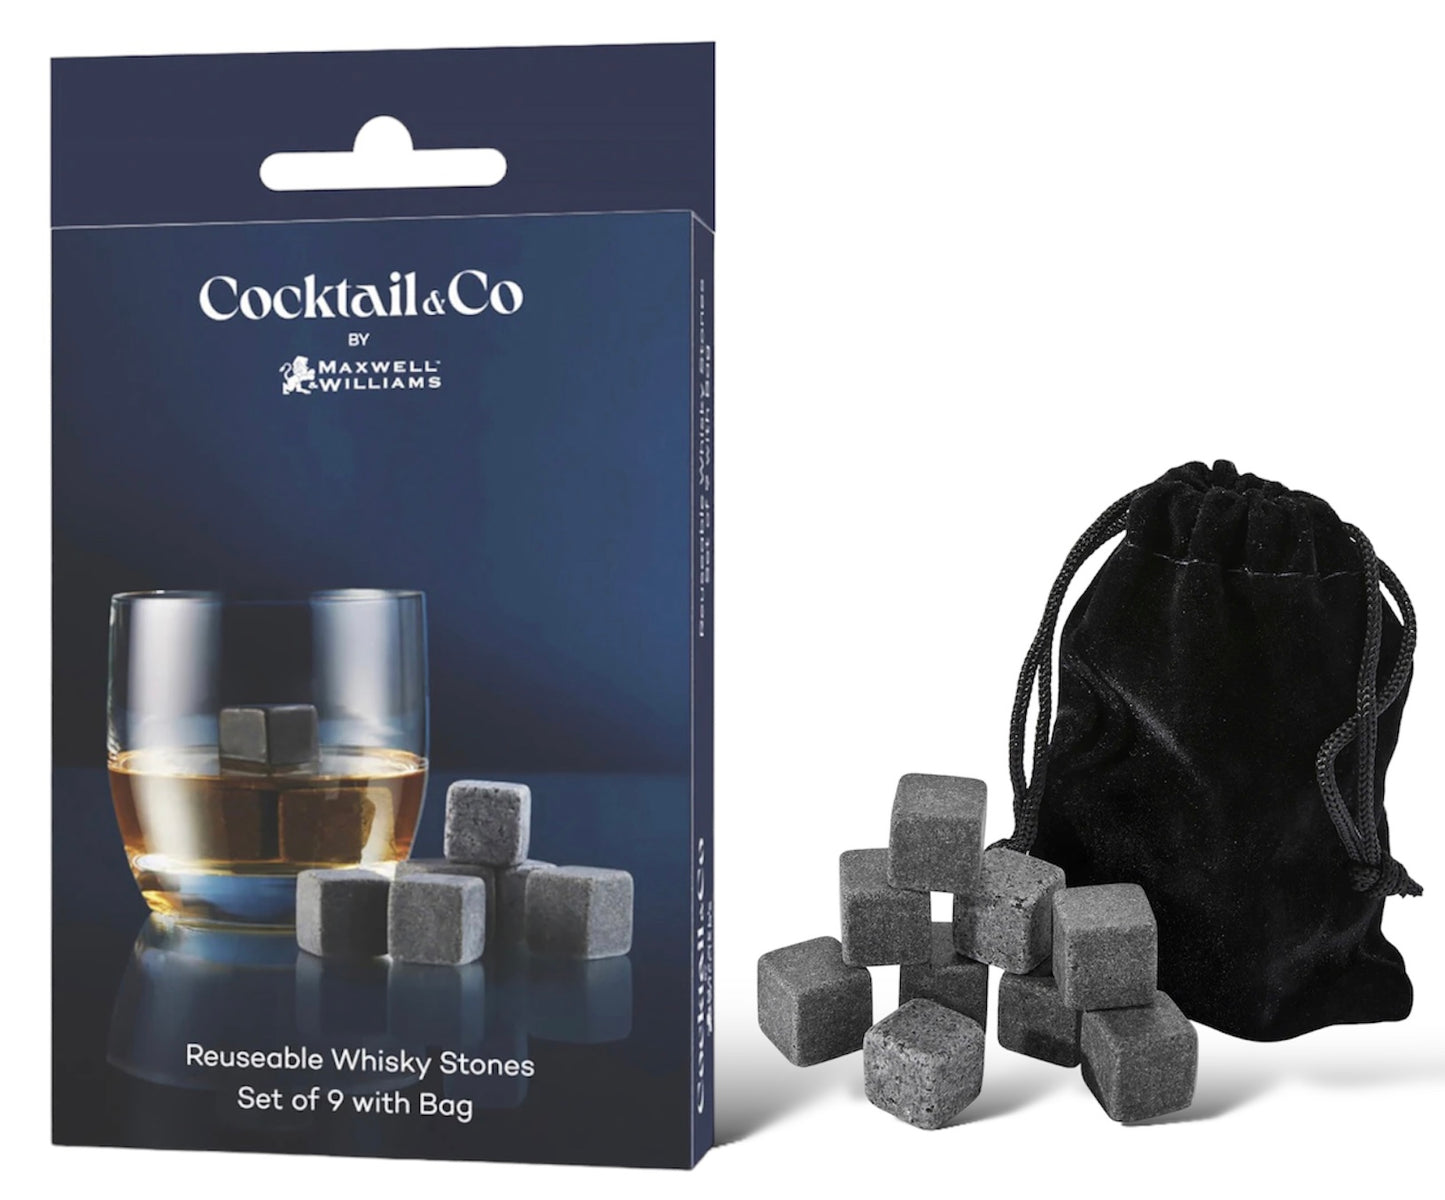 Maxwell & Williams Cocktail & Co. Reusable Whisky Stones